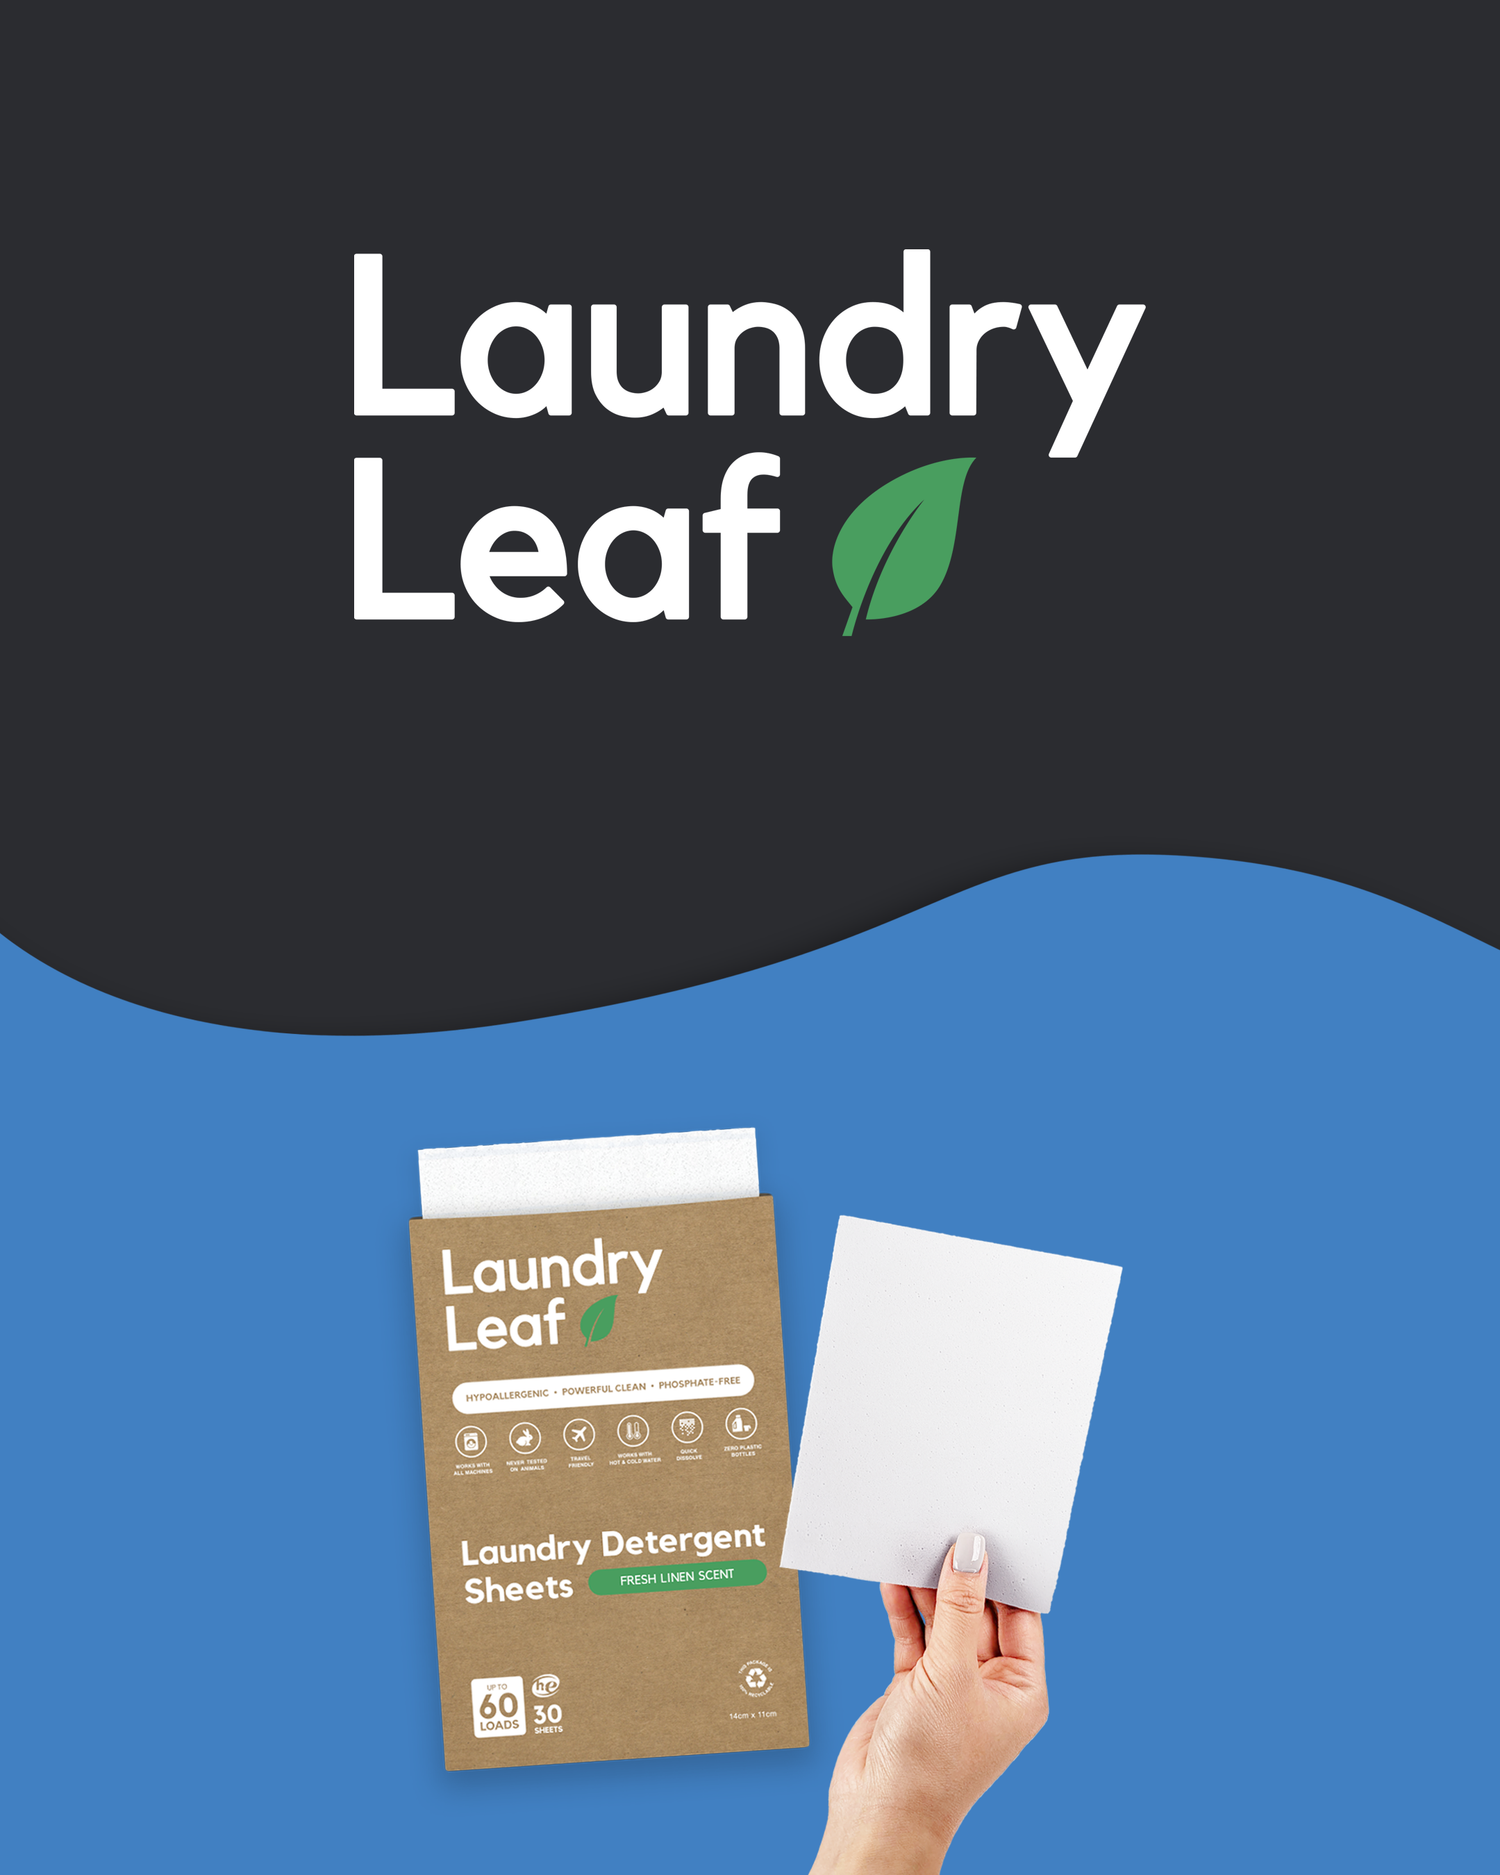 Laundry Leaf banner showing the logo and product packaging